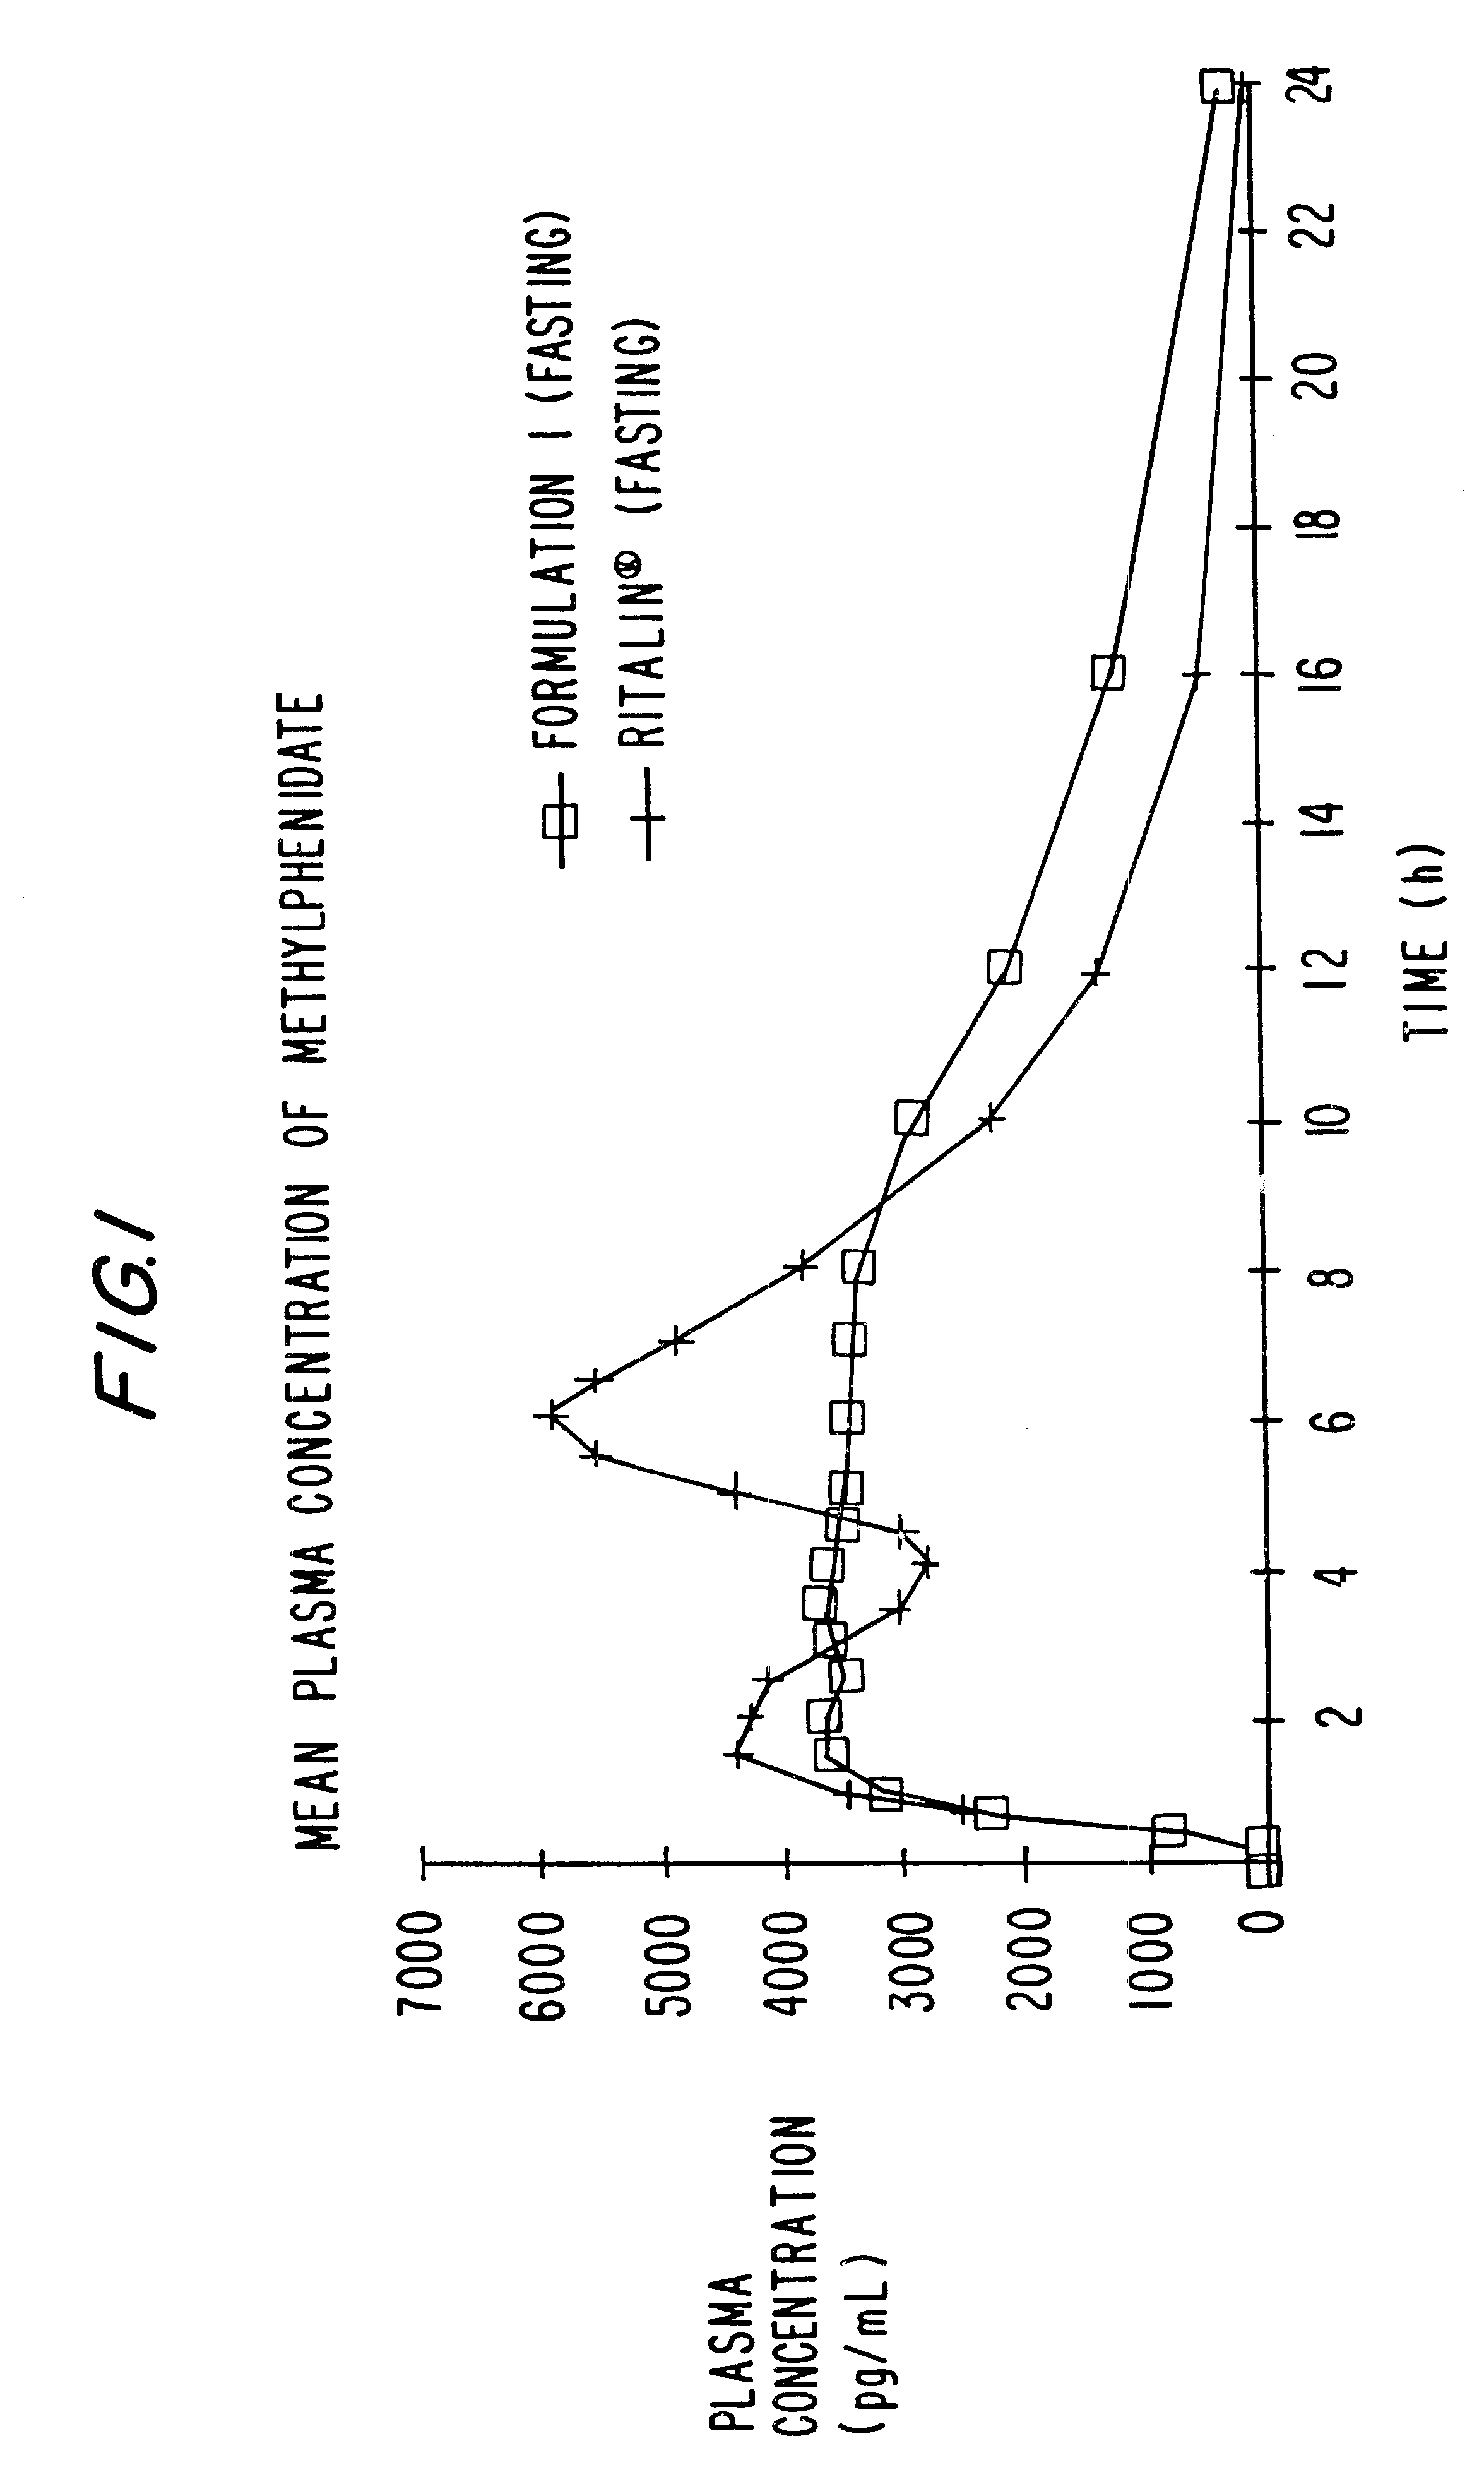 Controlled release formulations having rapid onset and rapid decline of effective plasma drug concentrations